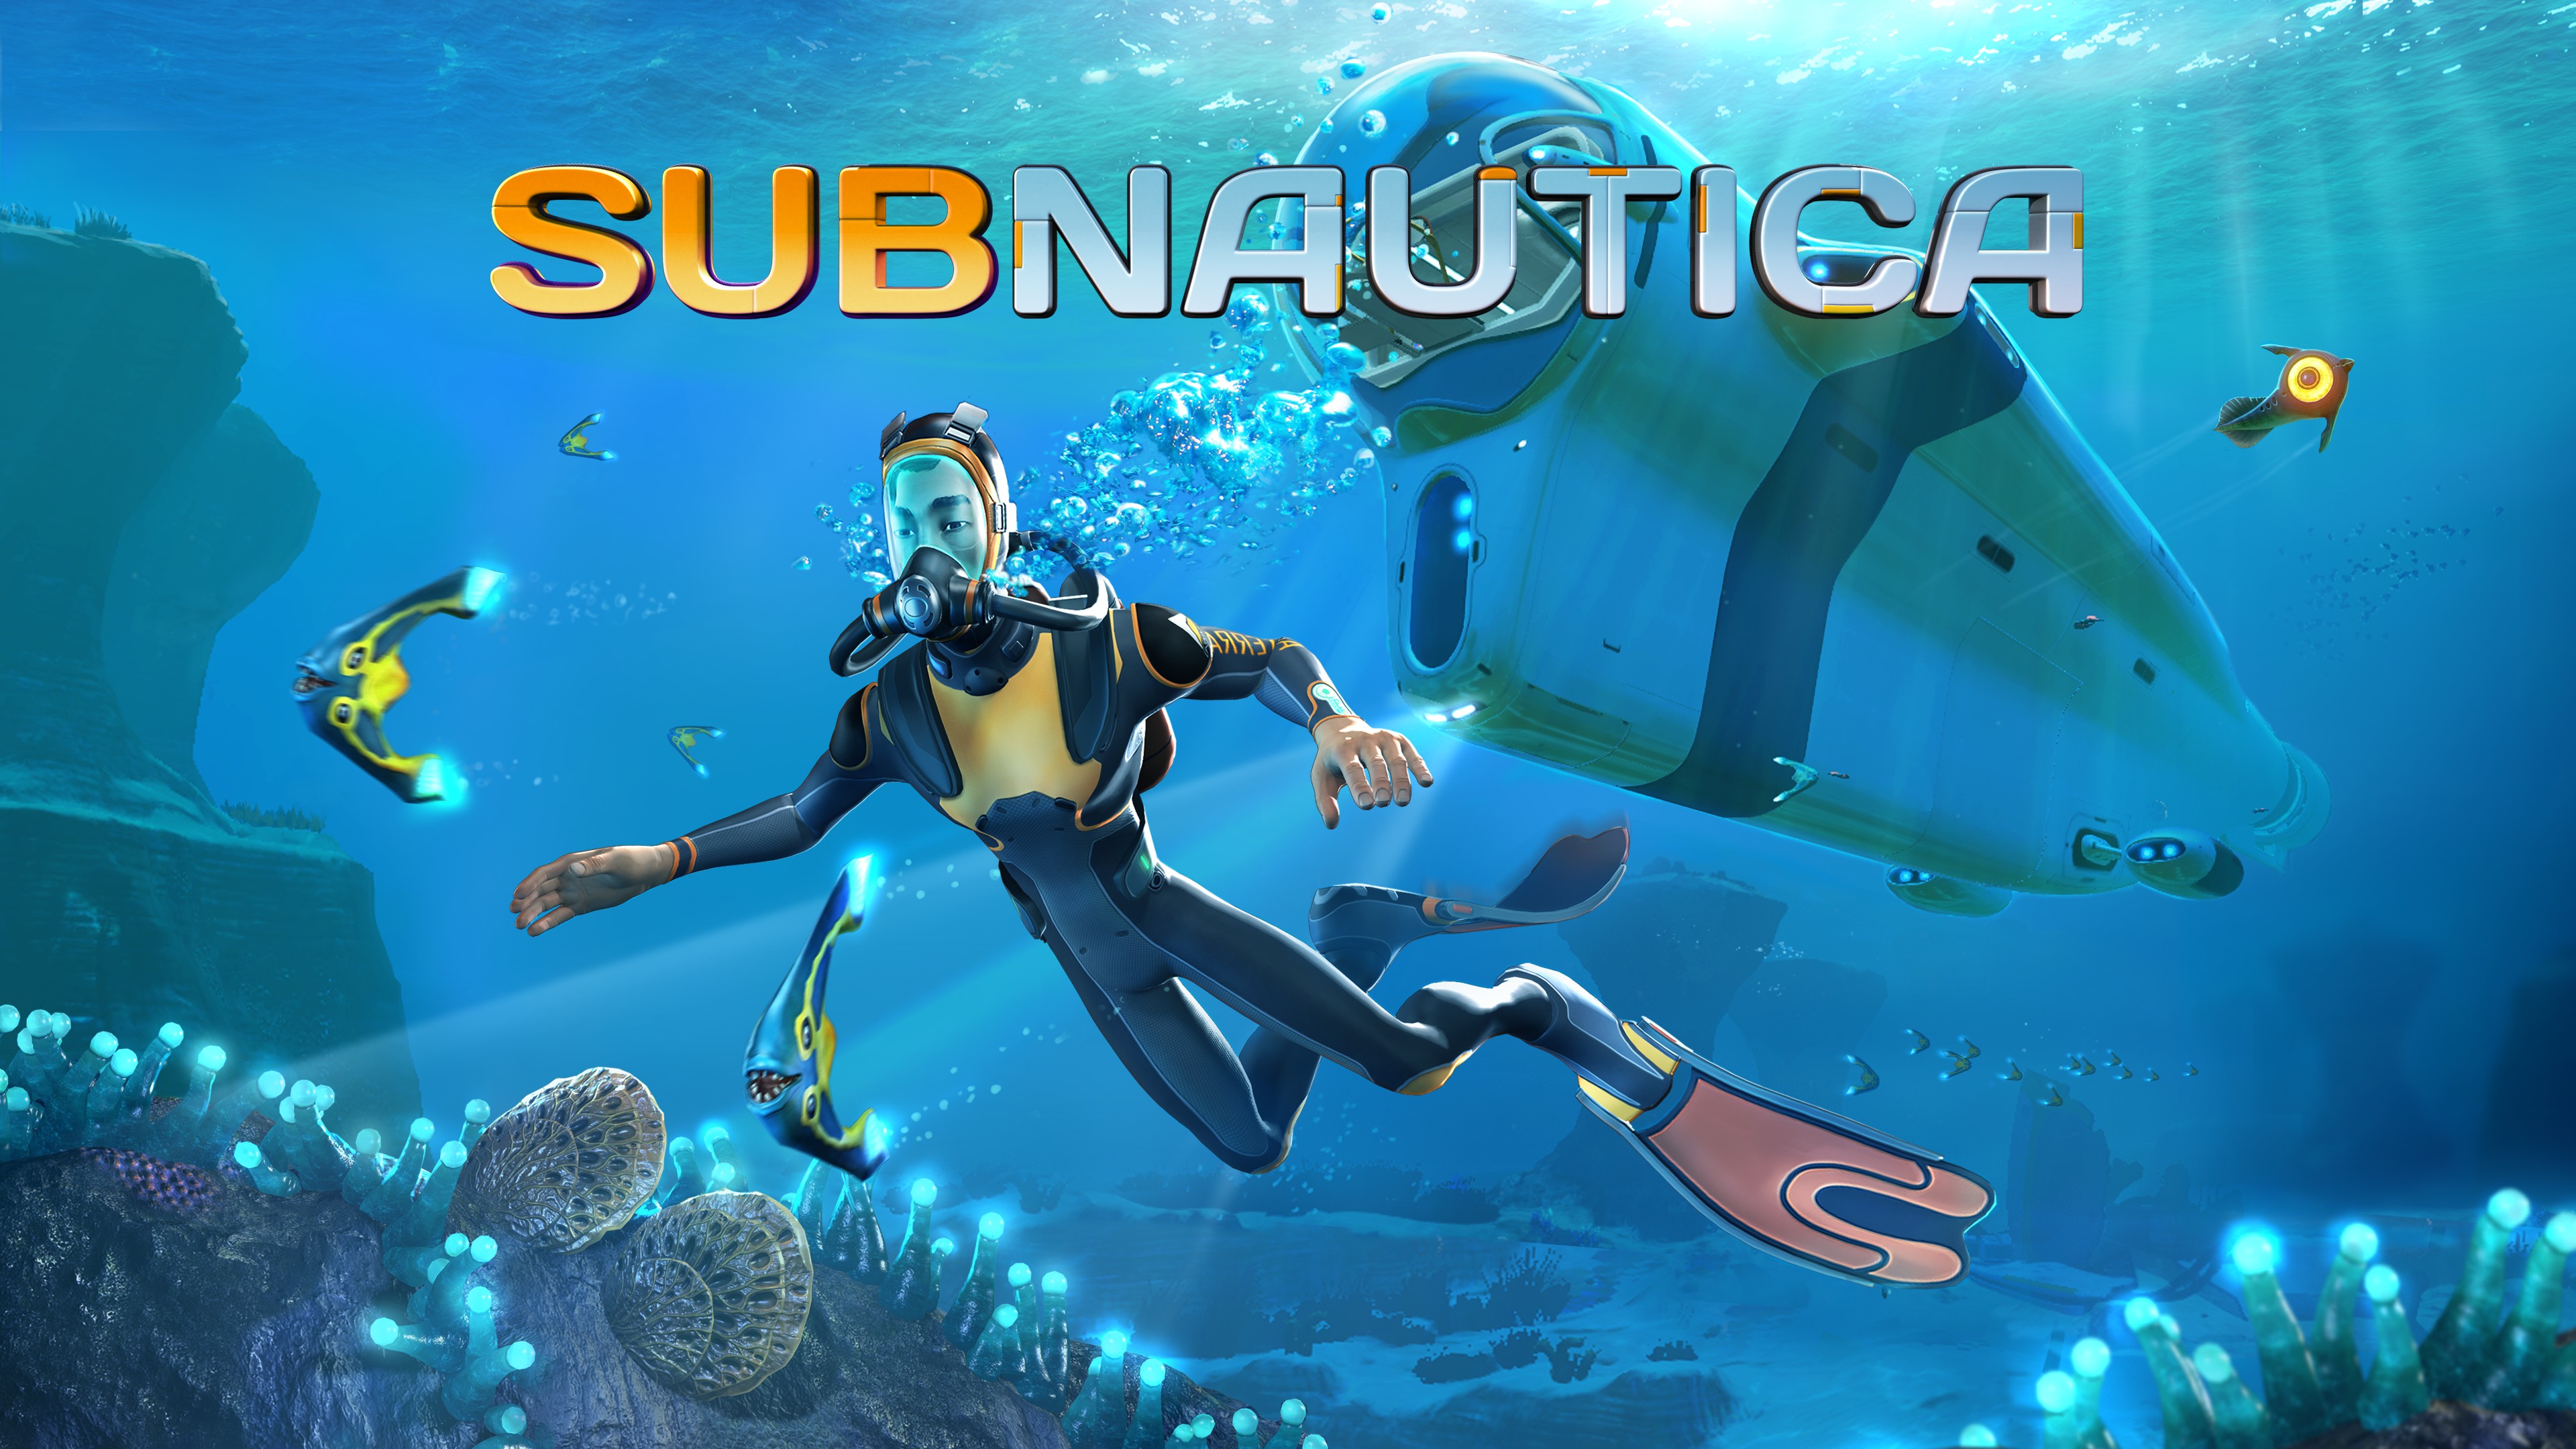 play-subnautica-today-with-xbox-game-pass-xbox-wire